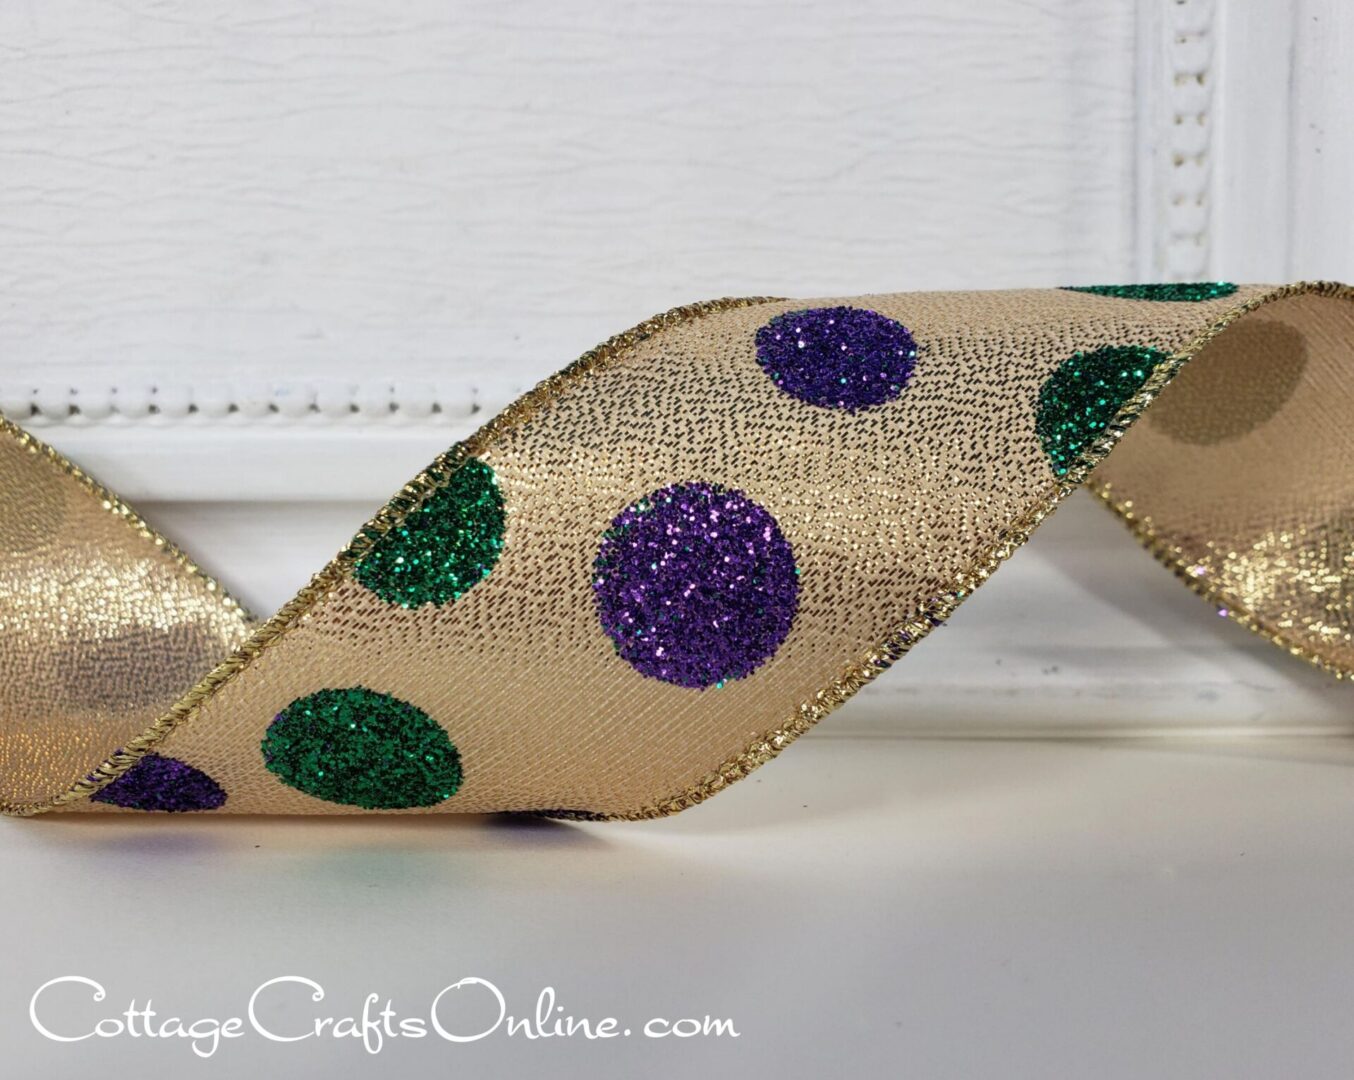 Mardi Gras purple and green glitter dots on gold 1.5" wide wired ribbon from the Etsy shop of Cottage Crafts Online.